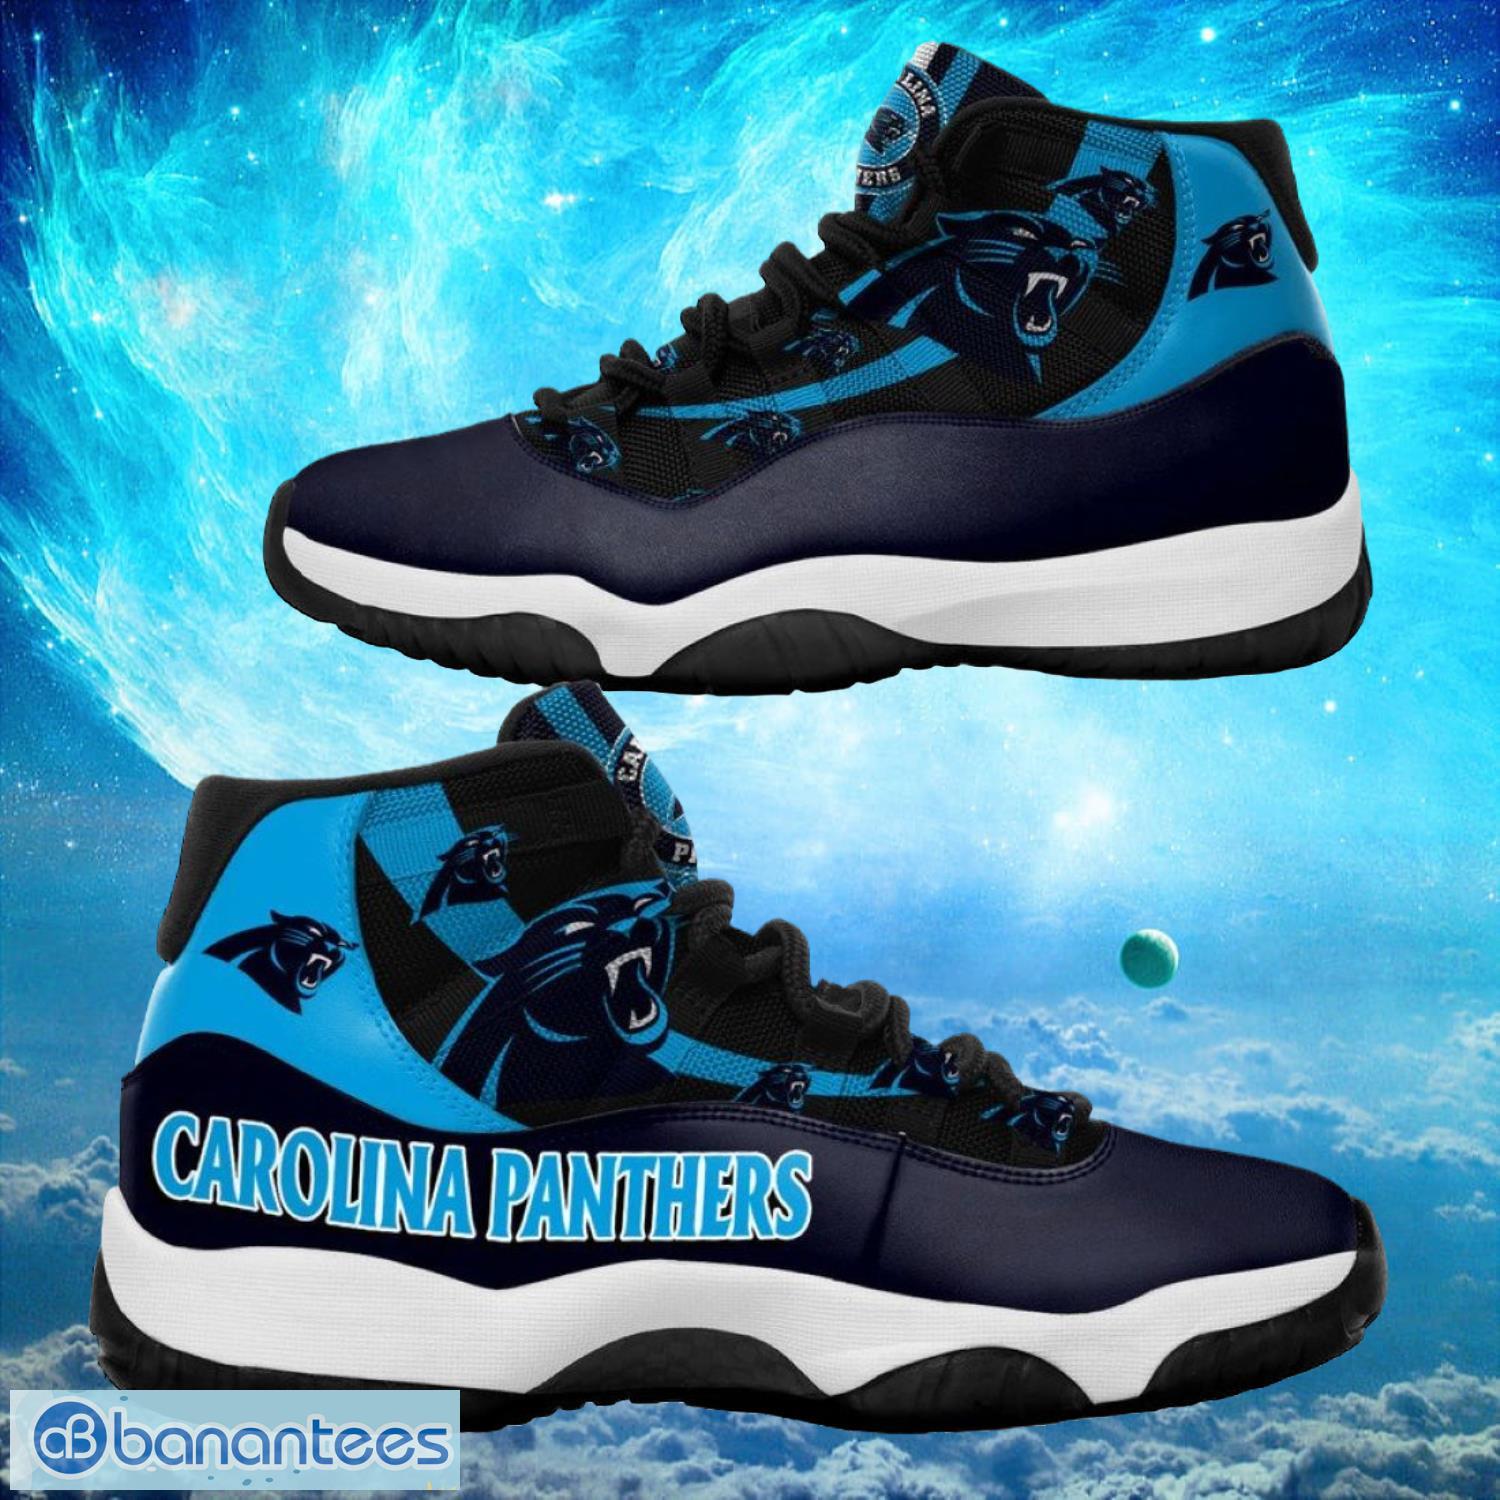 Carolina Panthers NFL Air Jordan 11 Sneakers Shoes Gift For Fans Product Photo 1